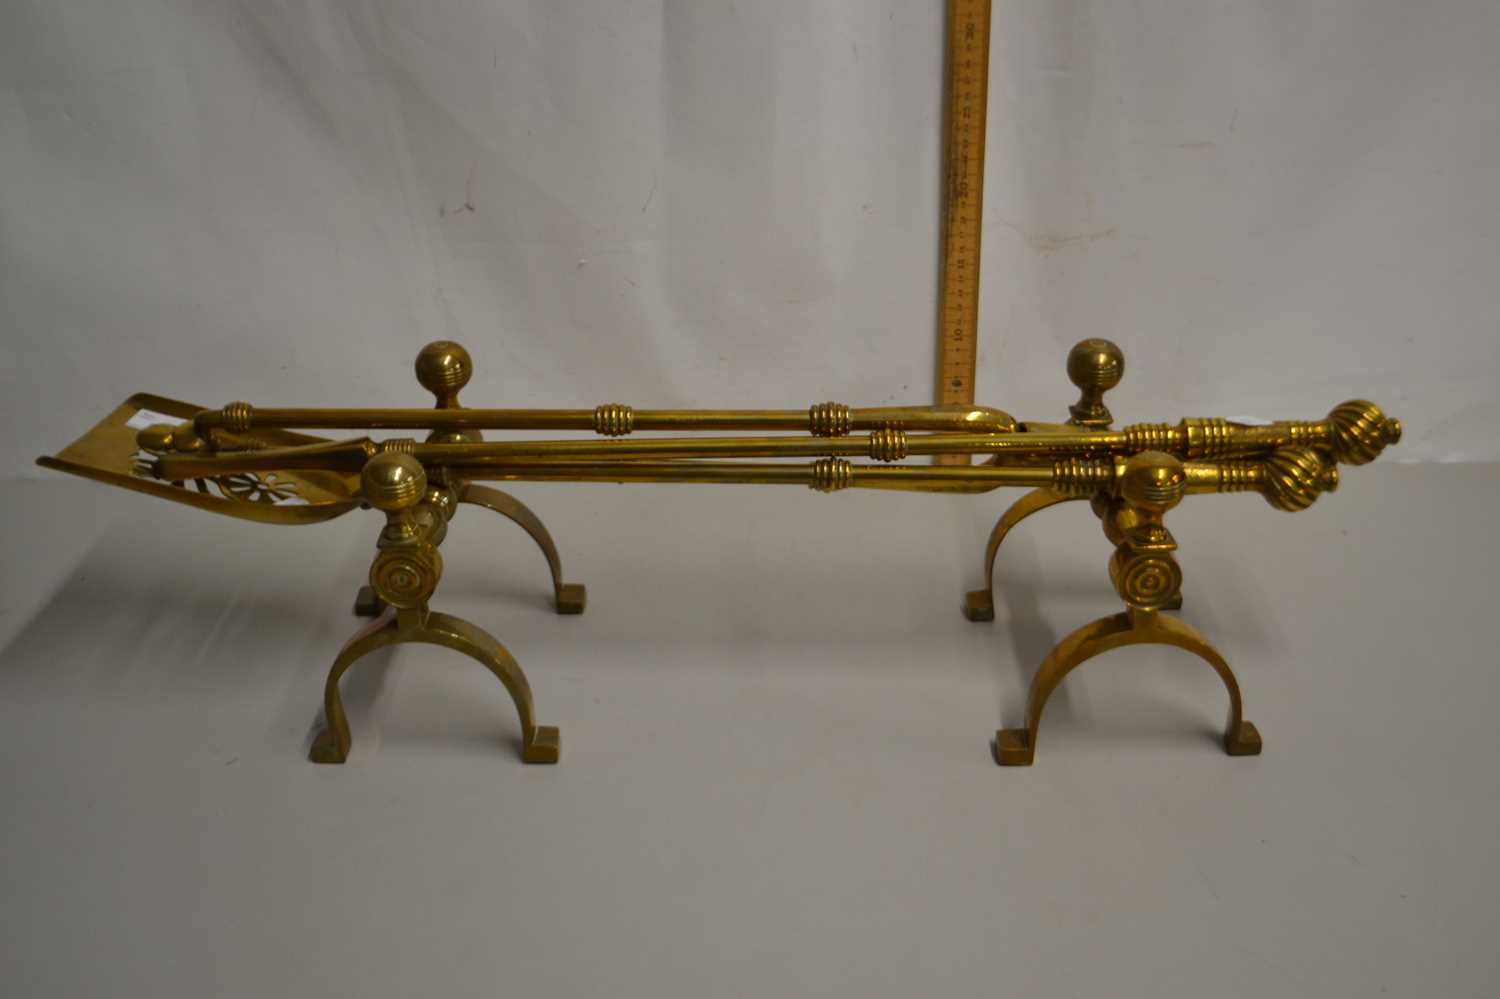 Brass fire tools and stands